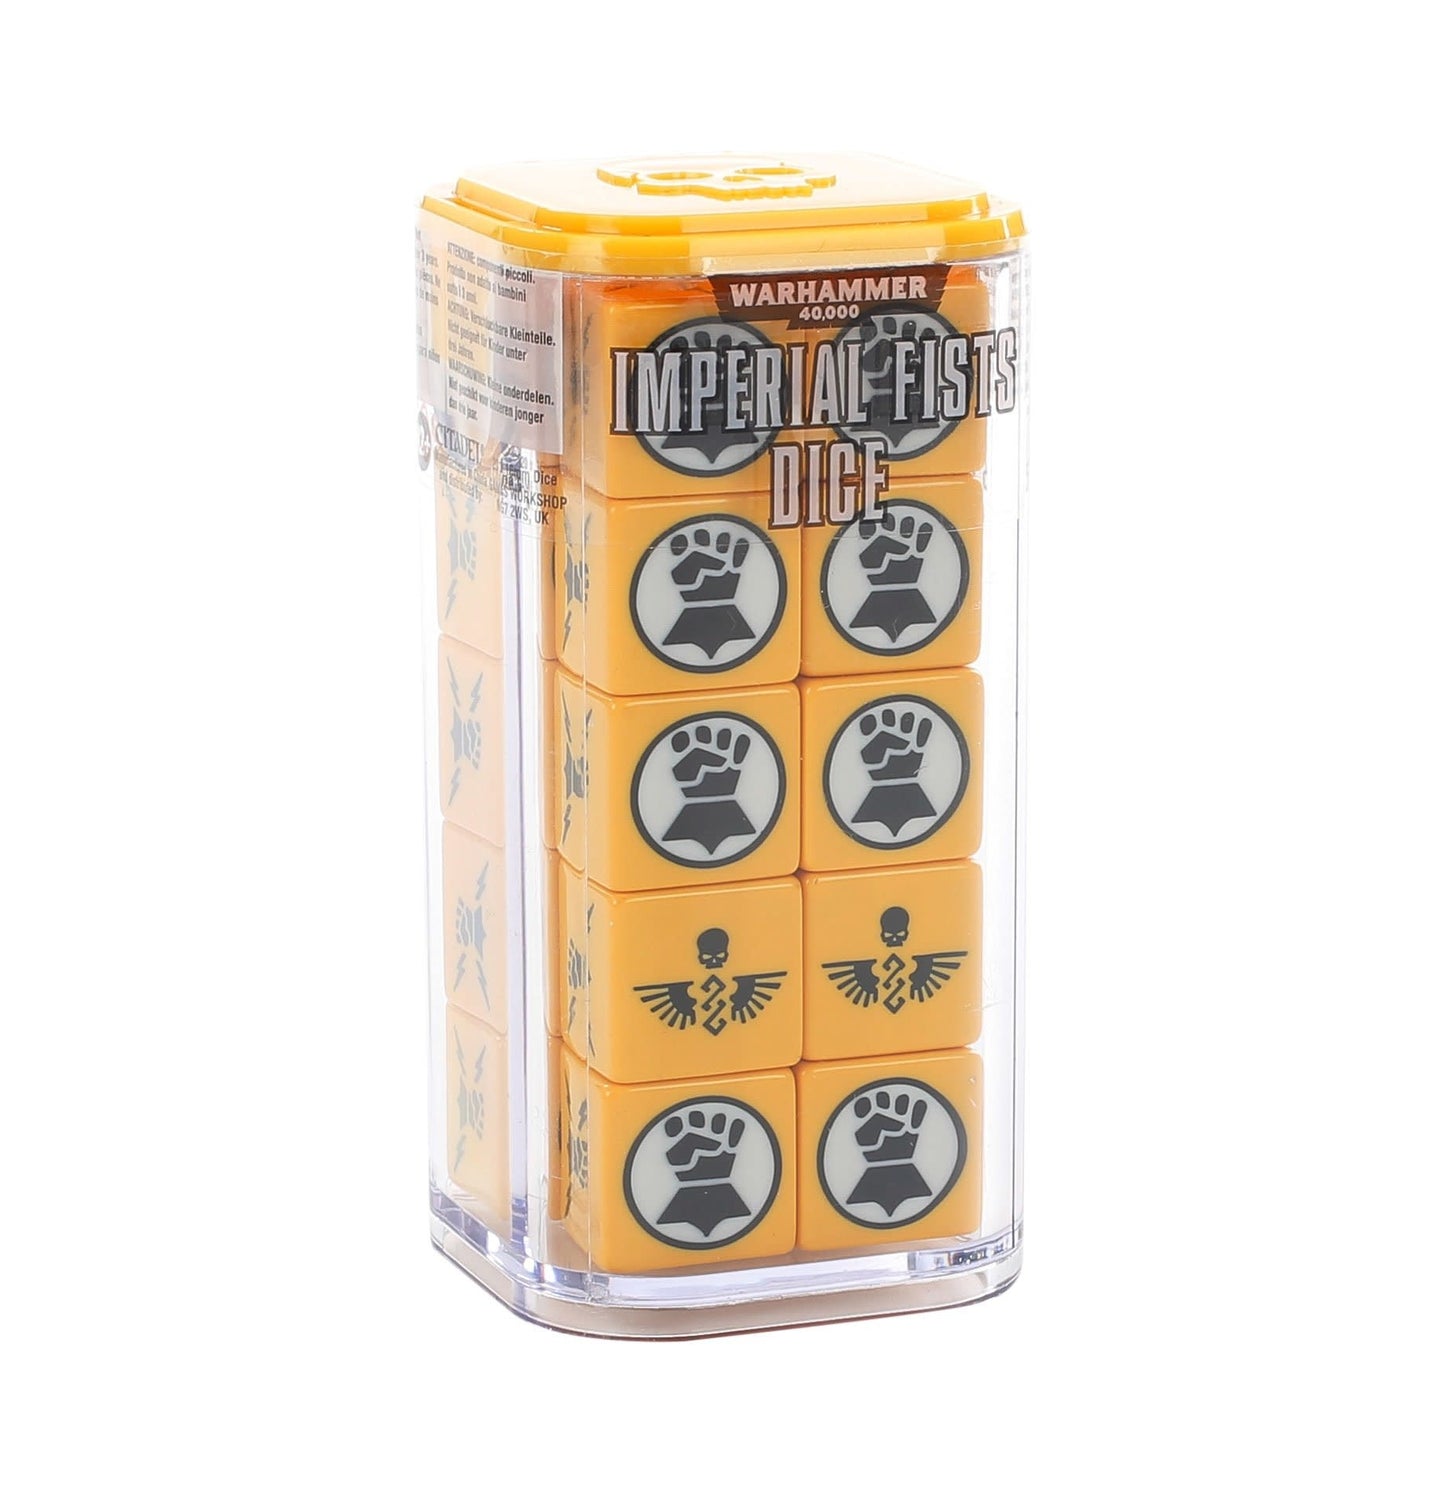 Space Marines Imperial Fists Dice - Warhammer: 40k - The Hooded Goblin